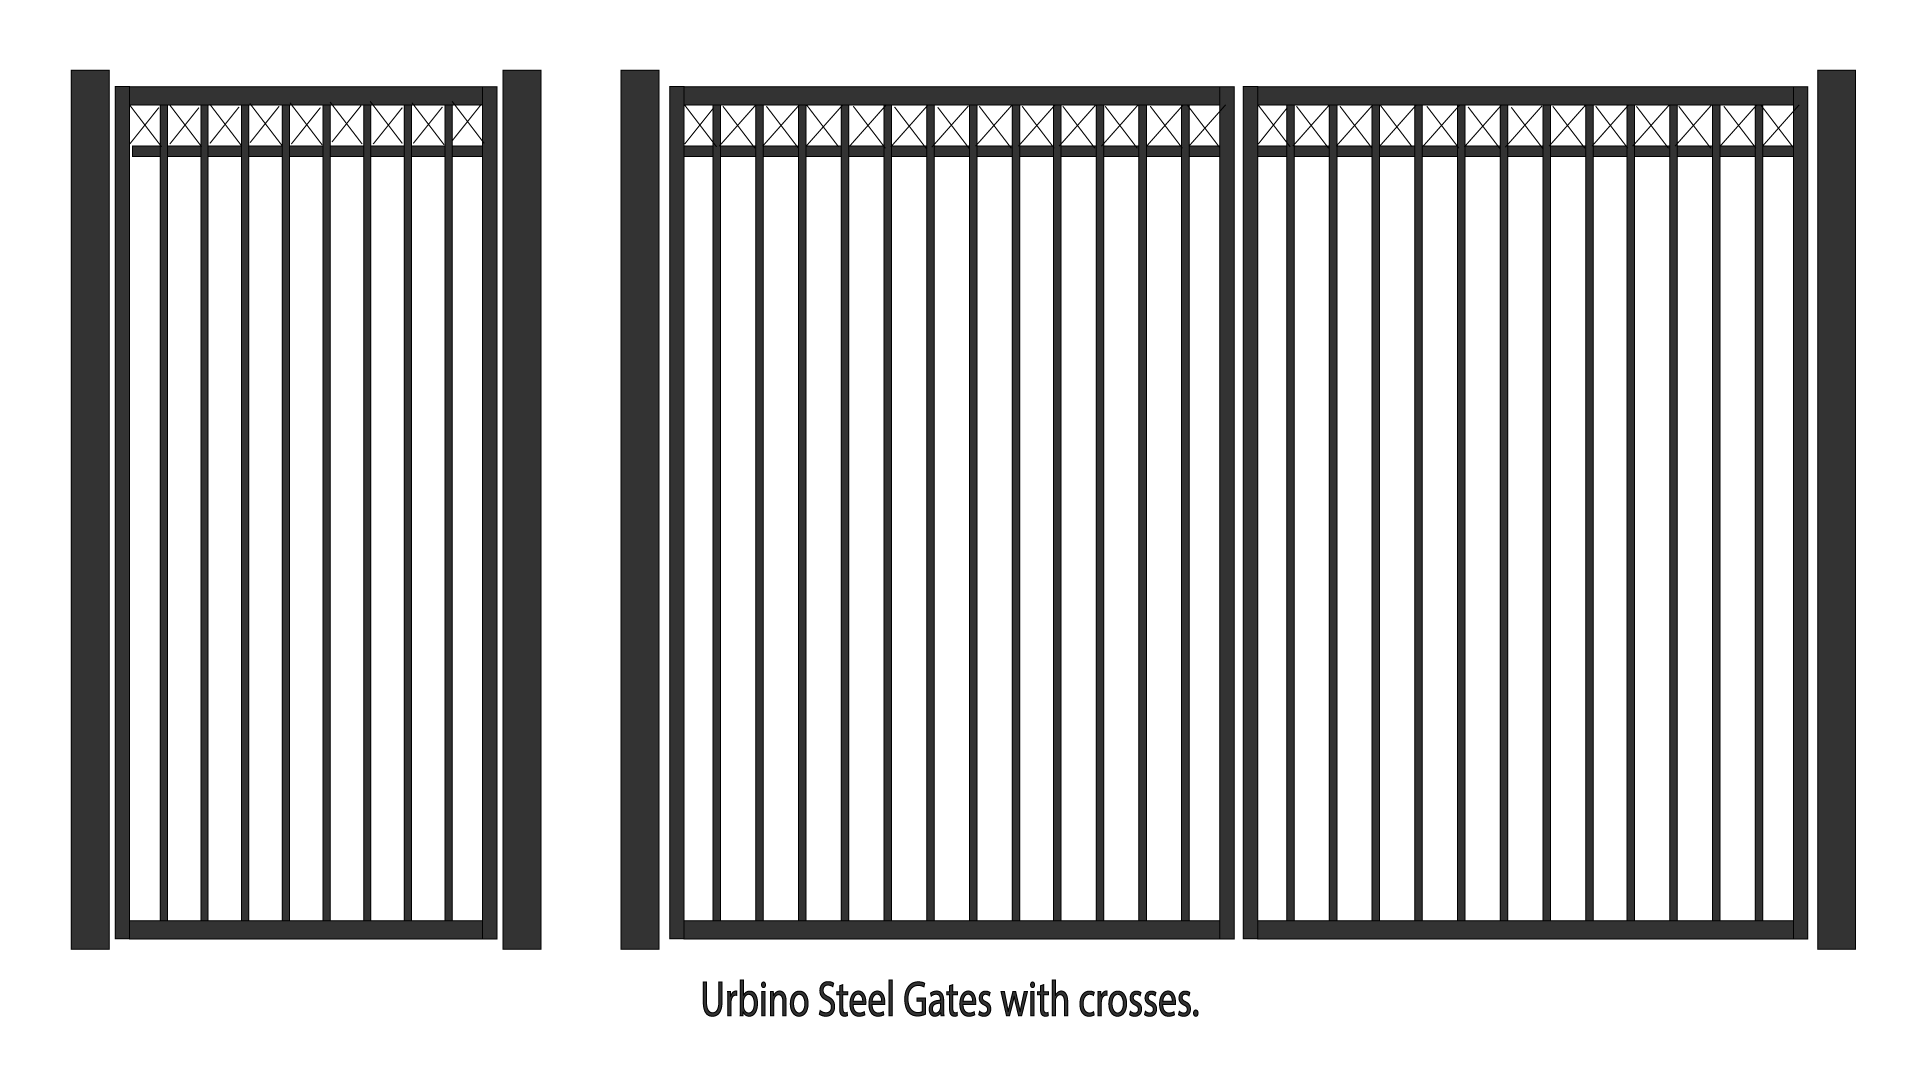 Steel Gate, wrought iron gates and metal fencing.